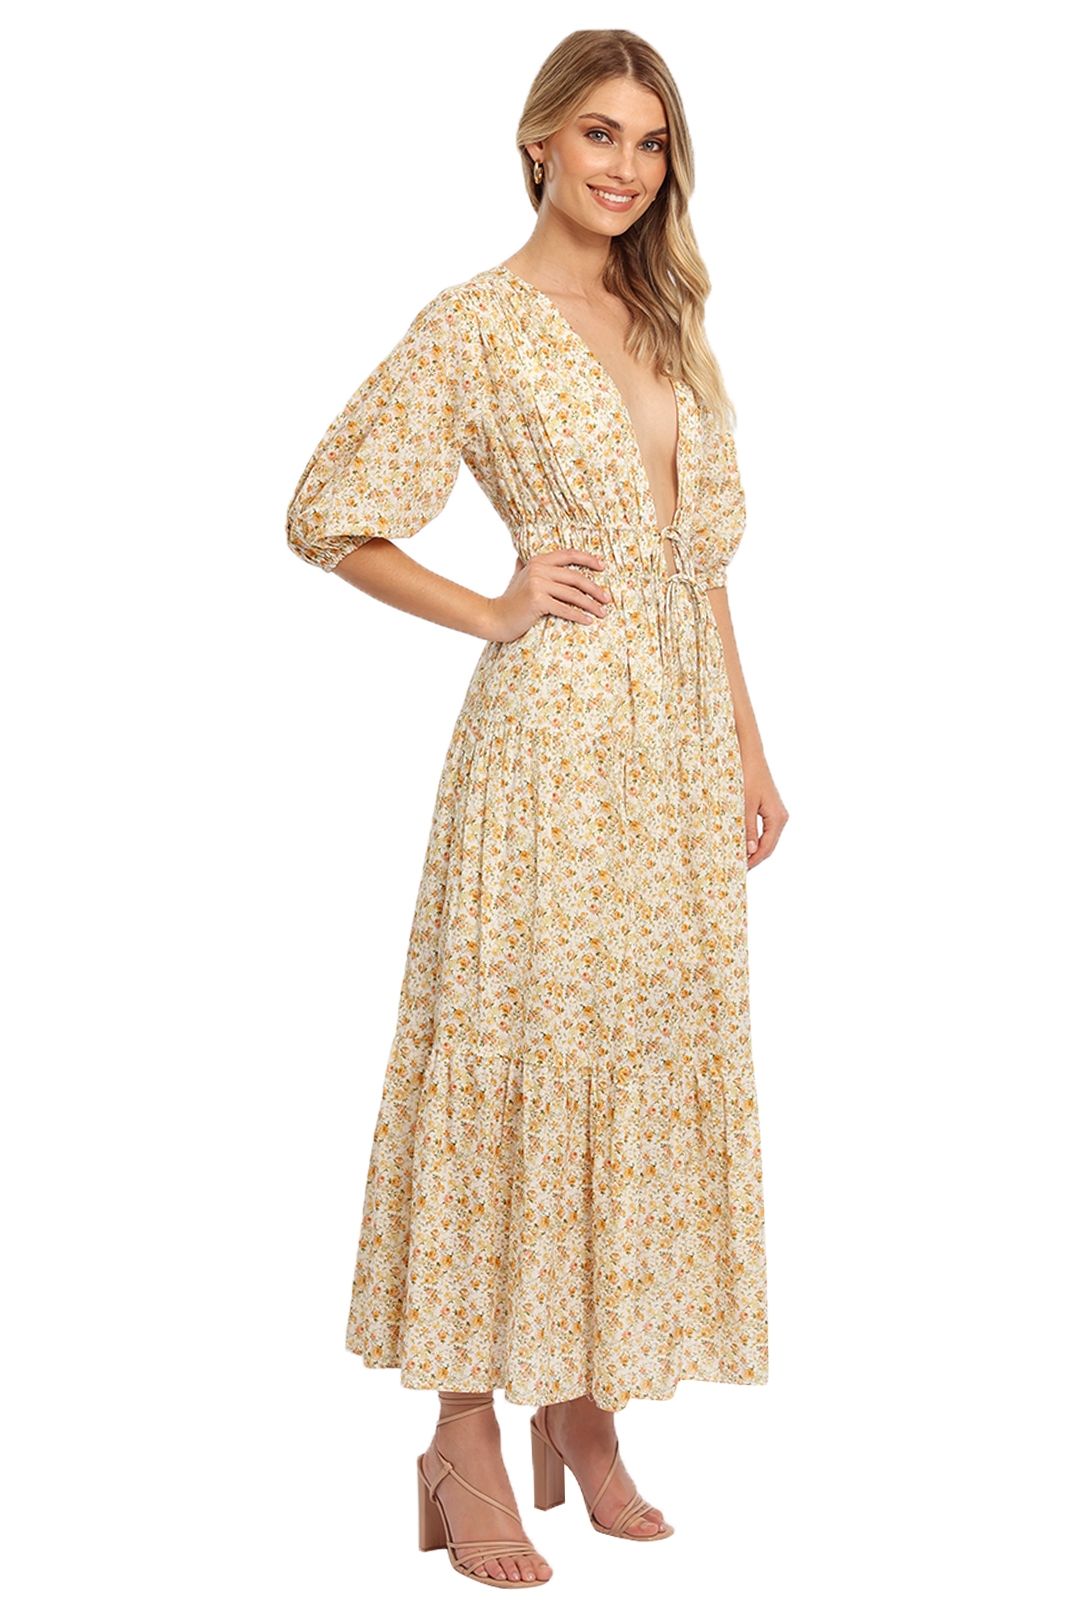 Significant Other Adele Dress Cutout